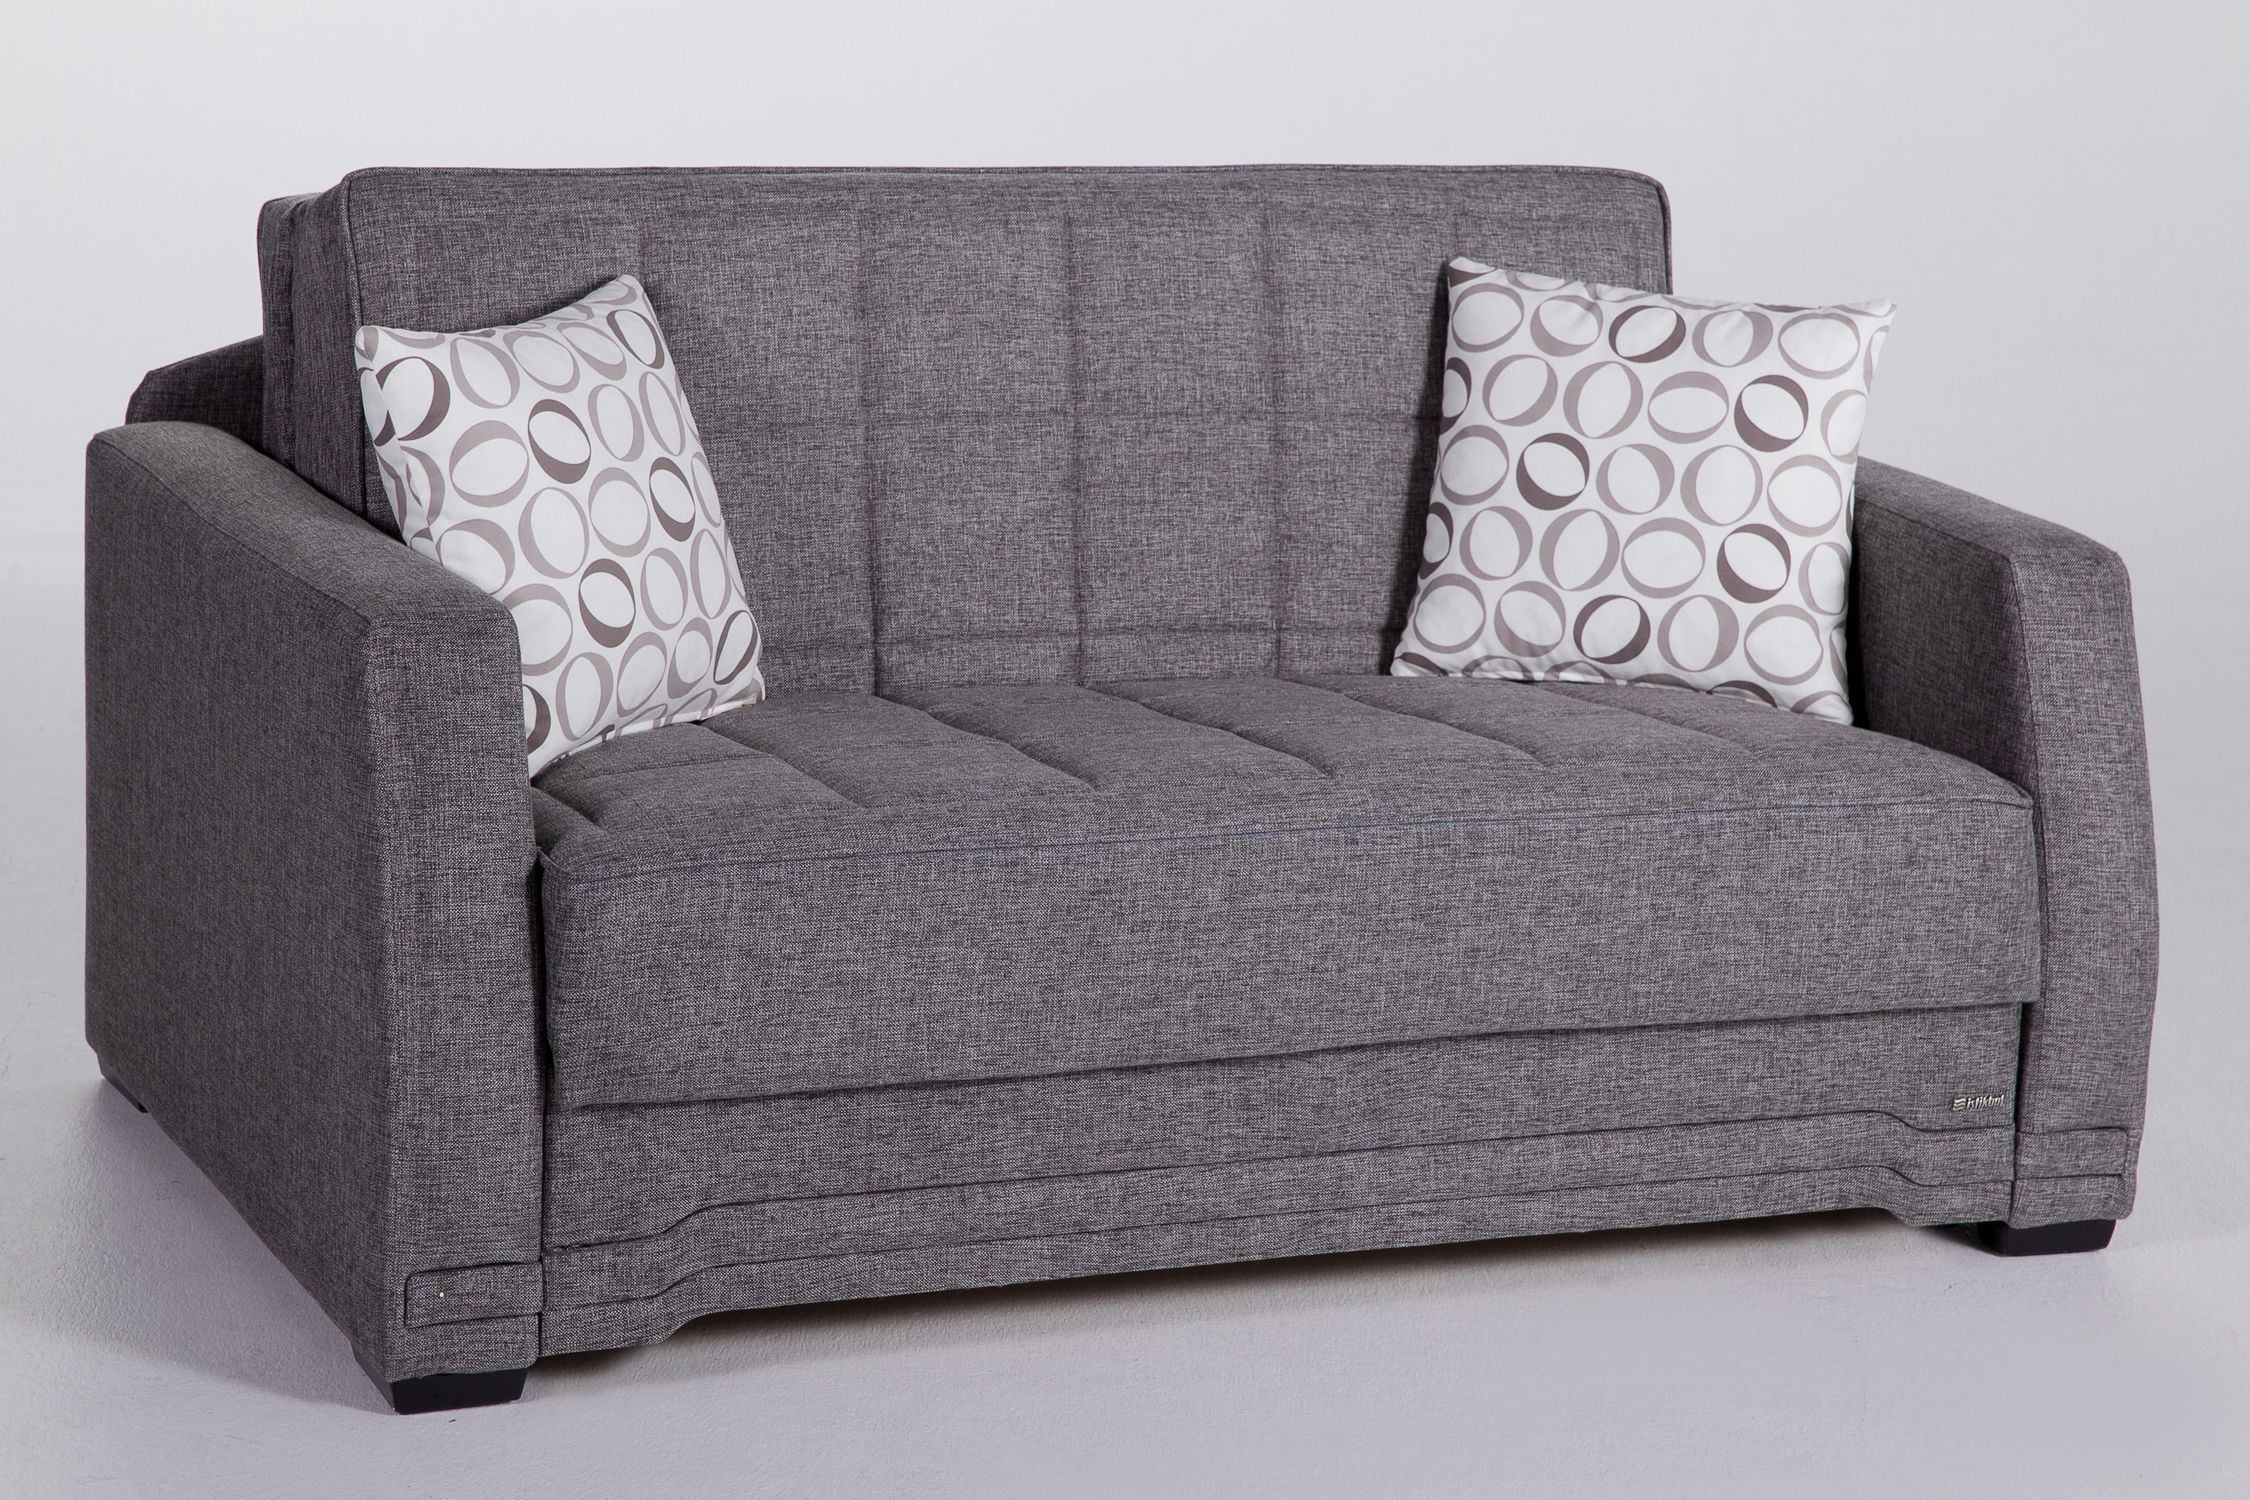 Valerie Diego Gray Loveseat Sleeperistikbal Furniture | Love Seat Intended For 3 In 1 Gray Pull Out Sleeper Sofas (View 17 of 20)